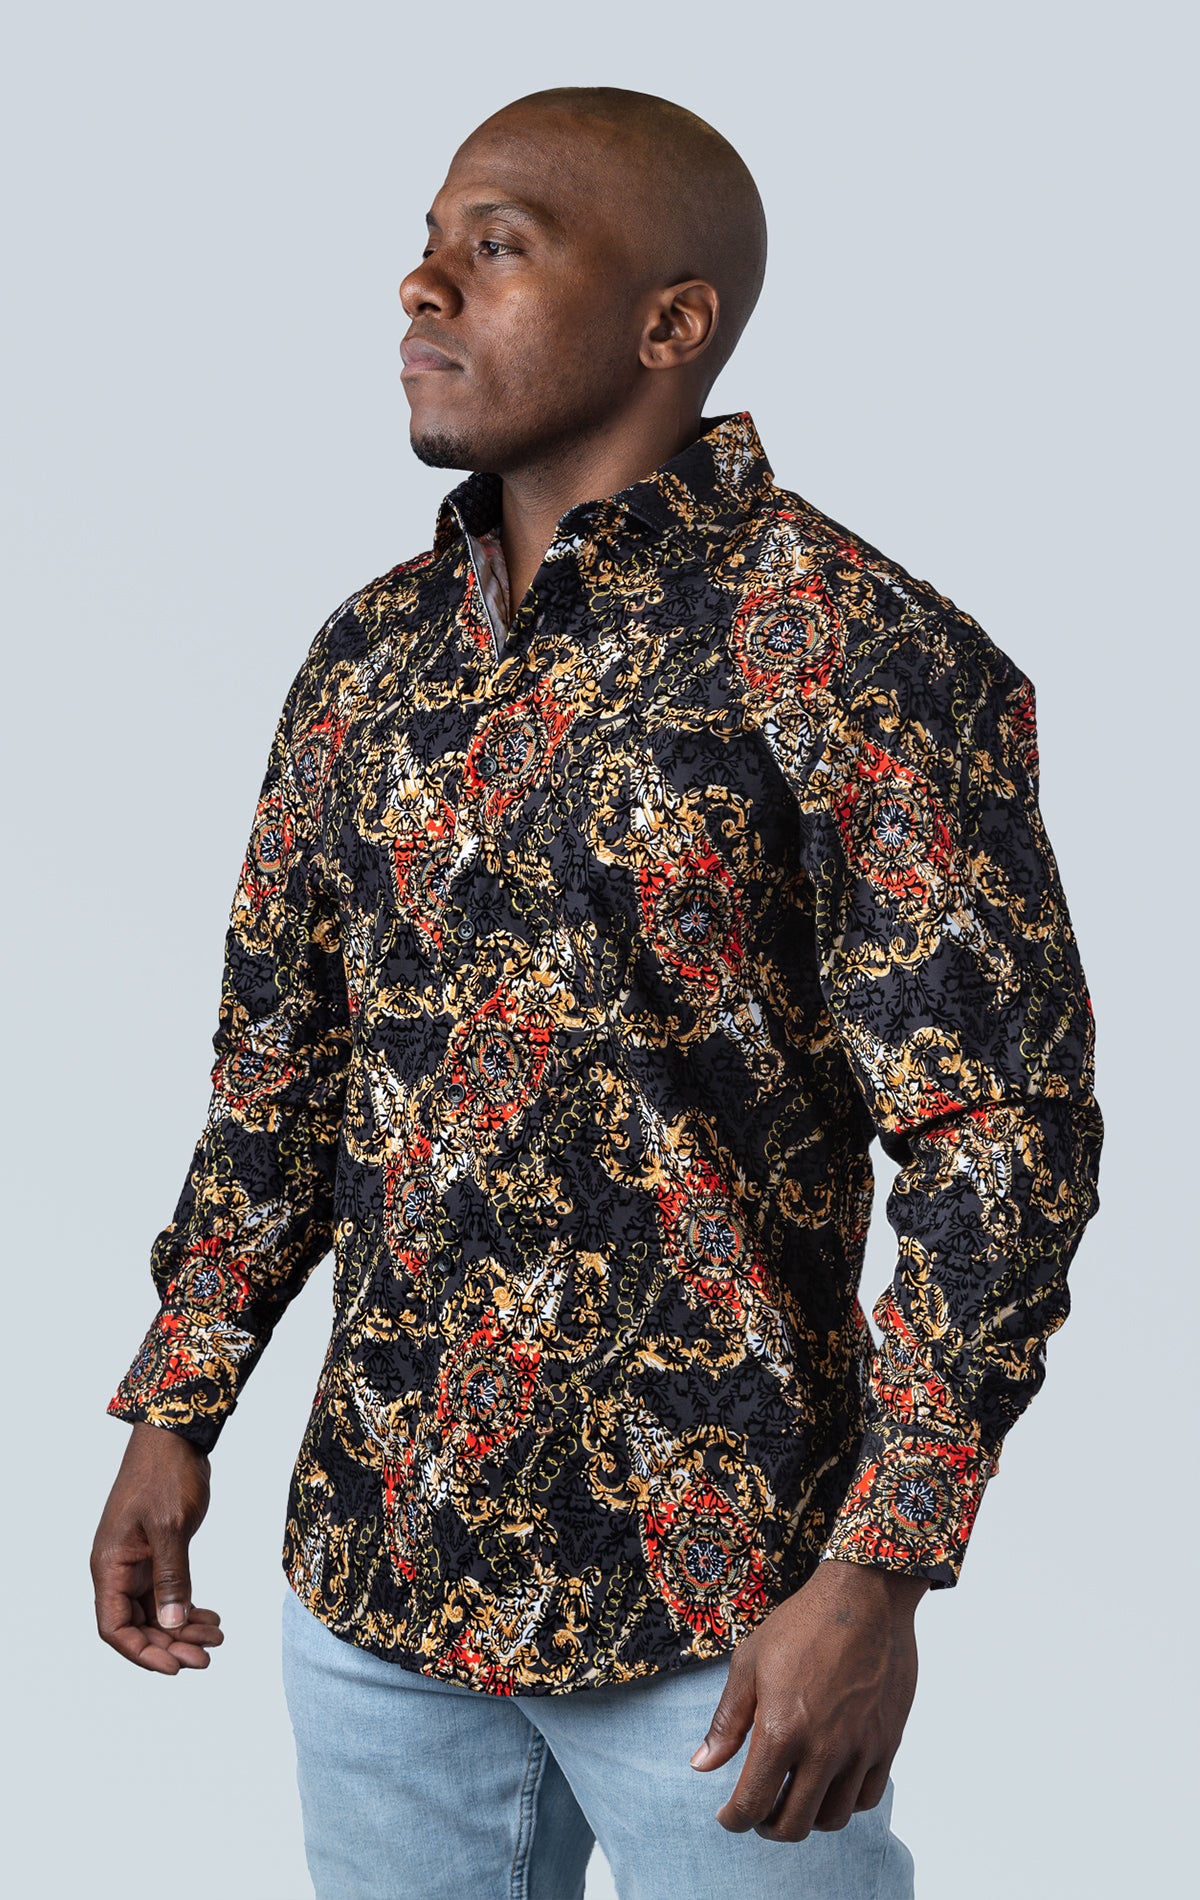 Long sleeve button up dress shirt with pattern